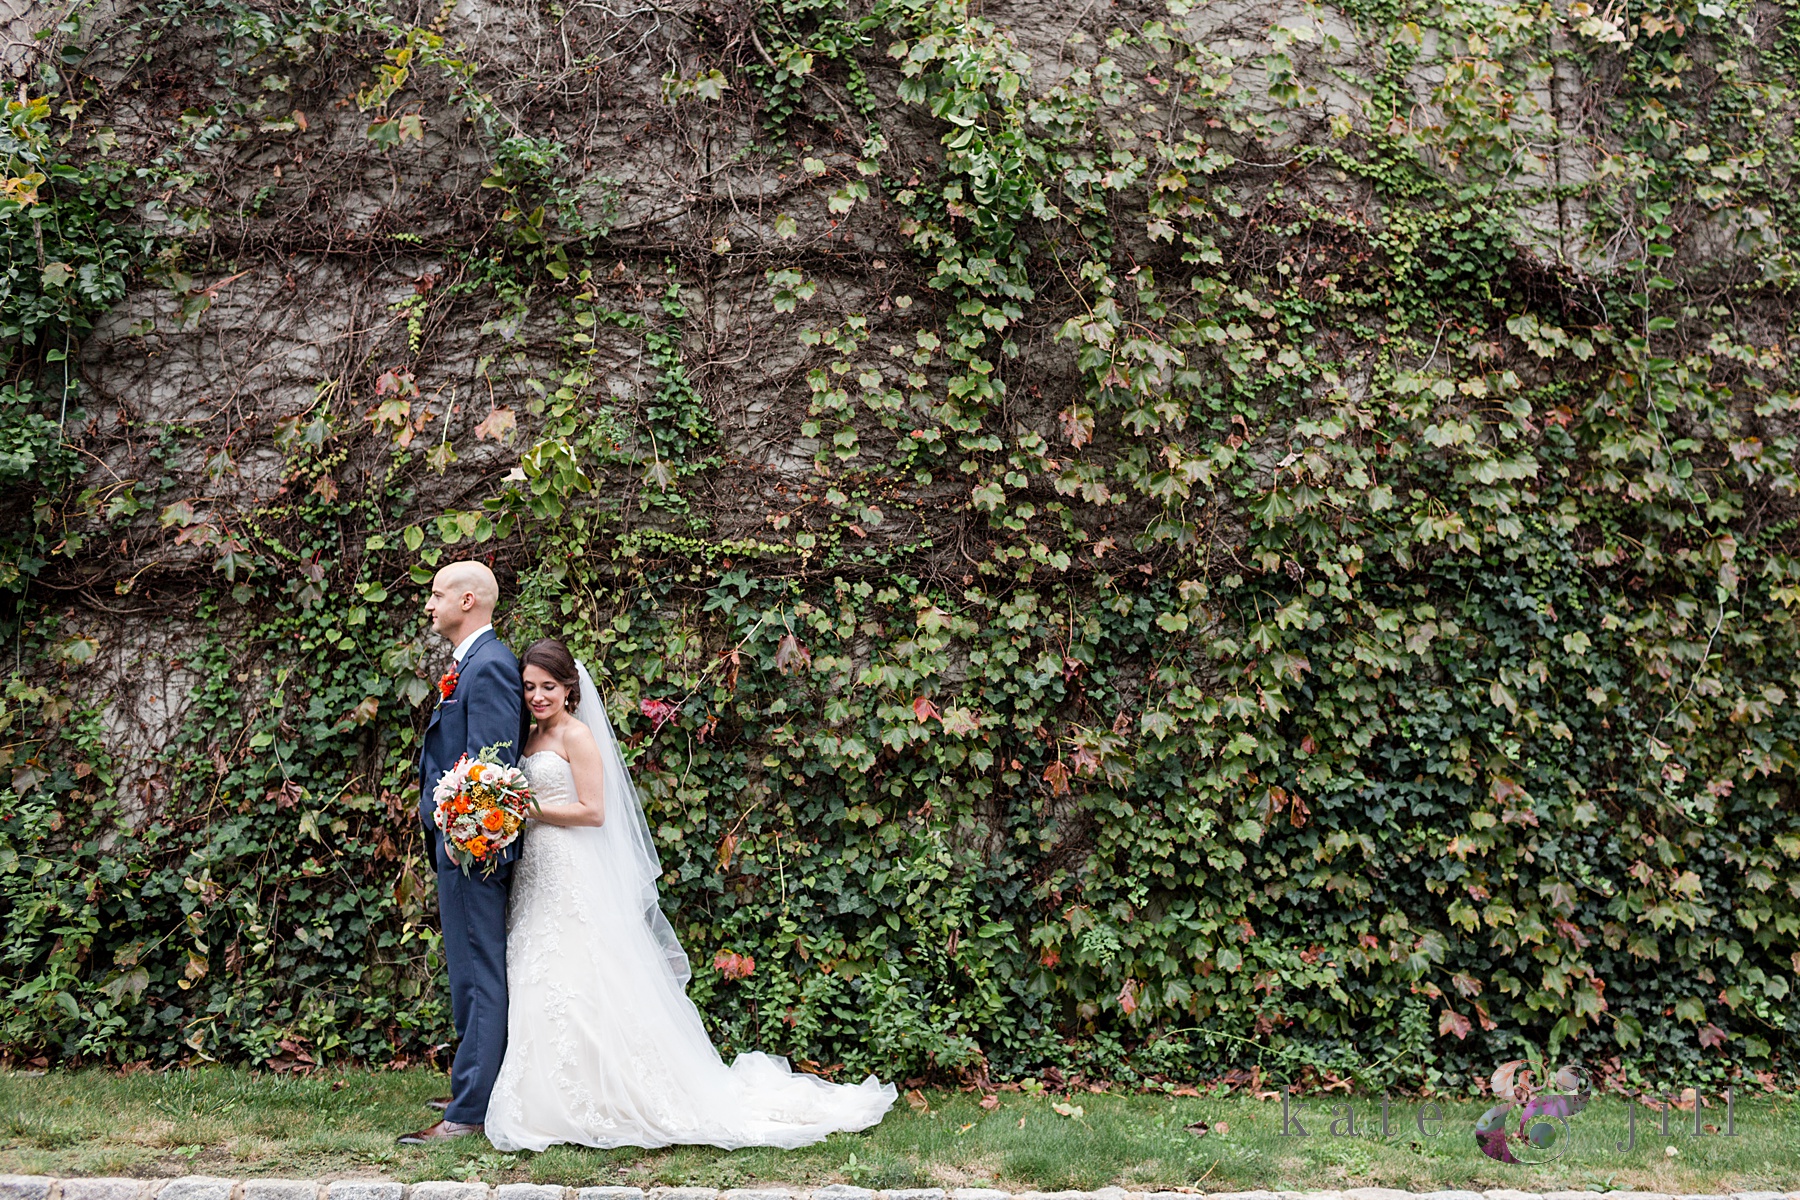 wedding first look in front of an ivy wall at Trump National golf course